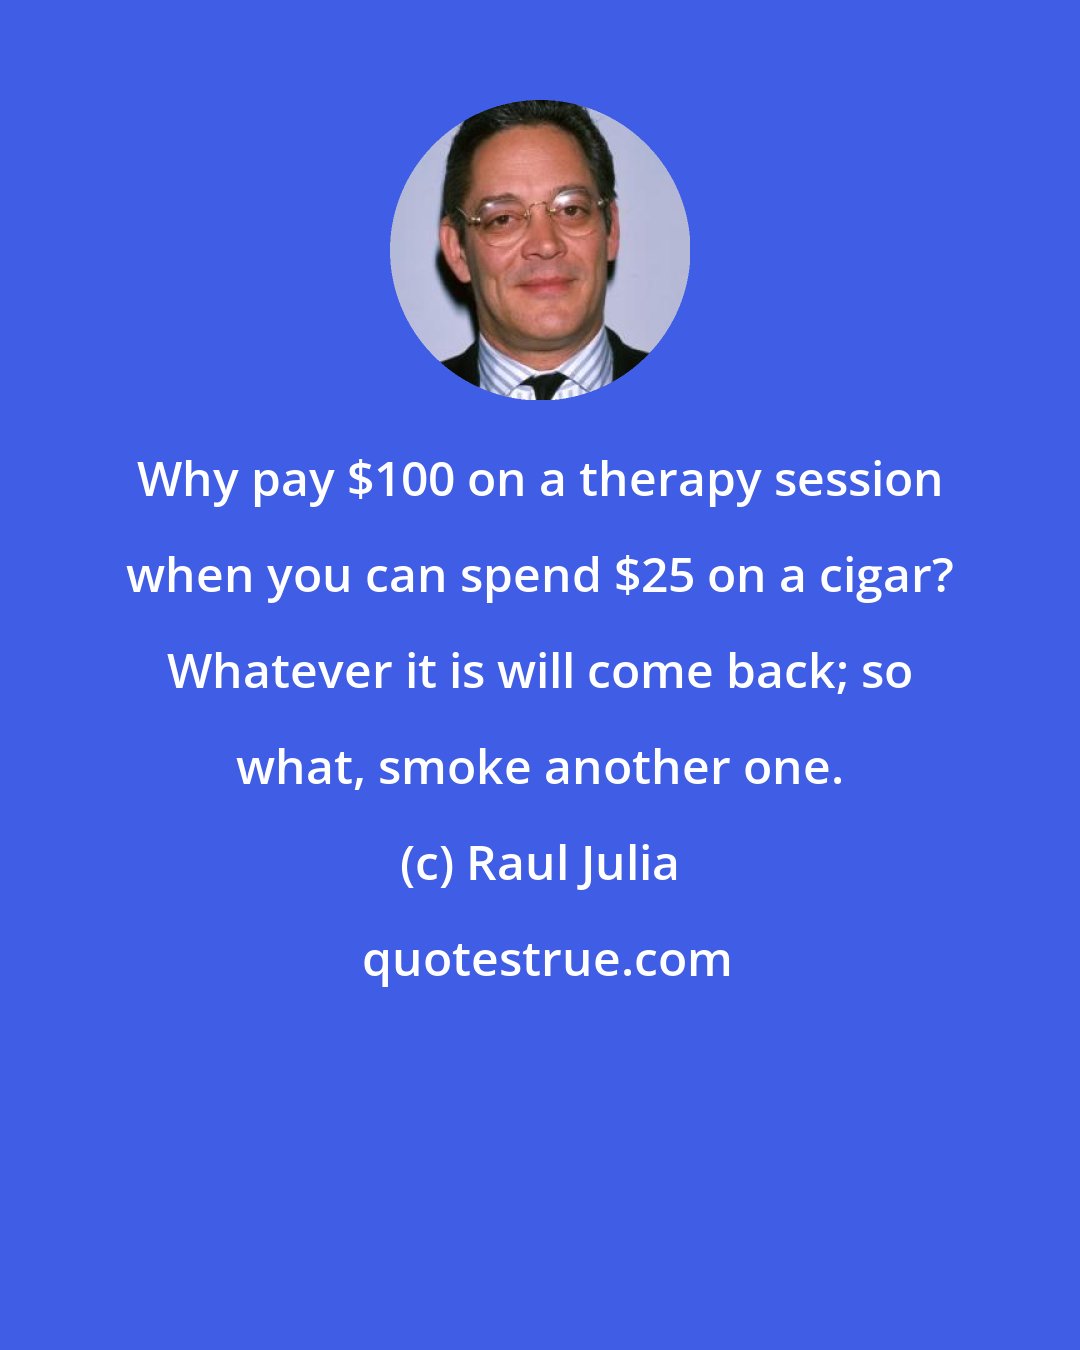 Raul Julia: Why pay $100 on a therapy session when you can spend $25 on a cigar? Whatever it is will come back; so what, smoke another one.